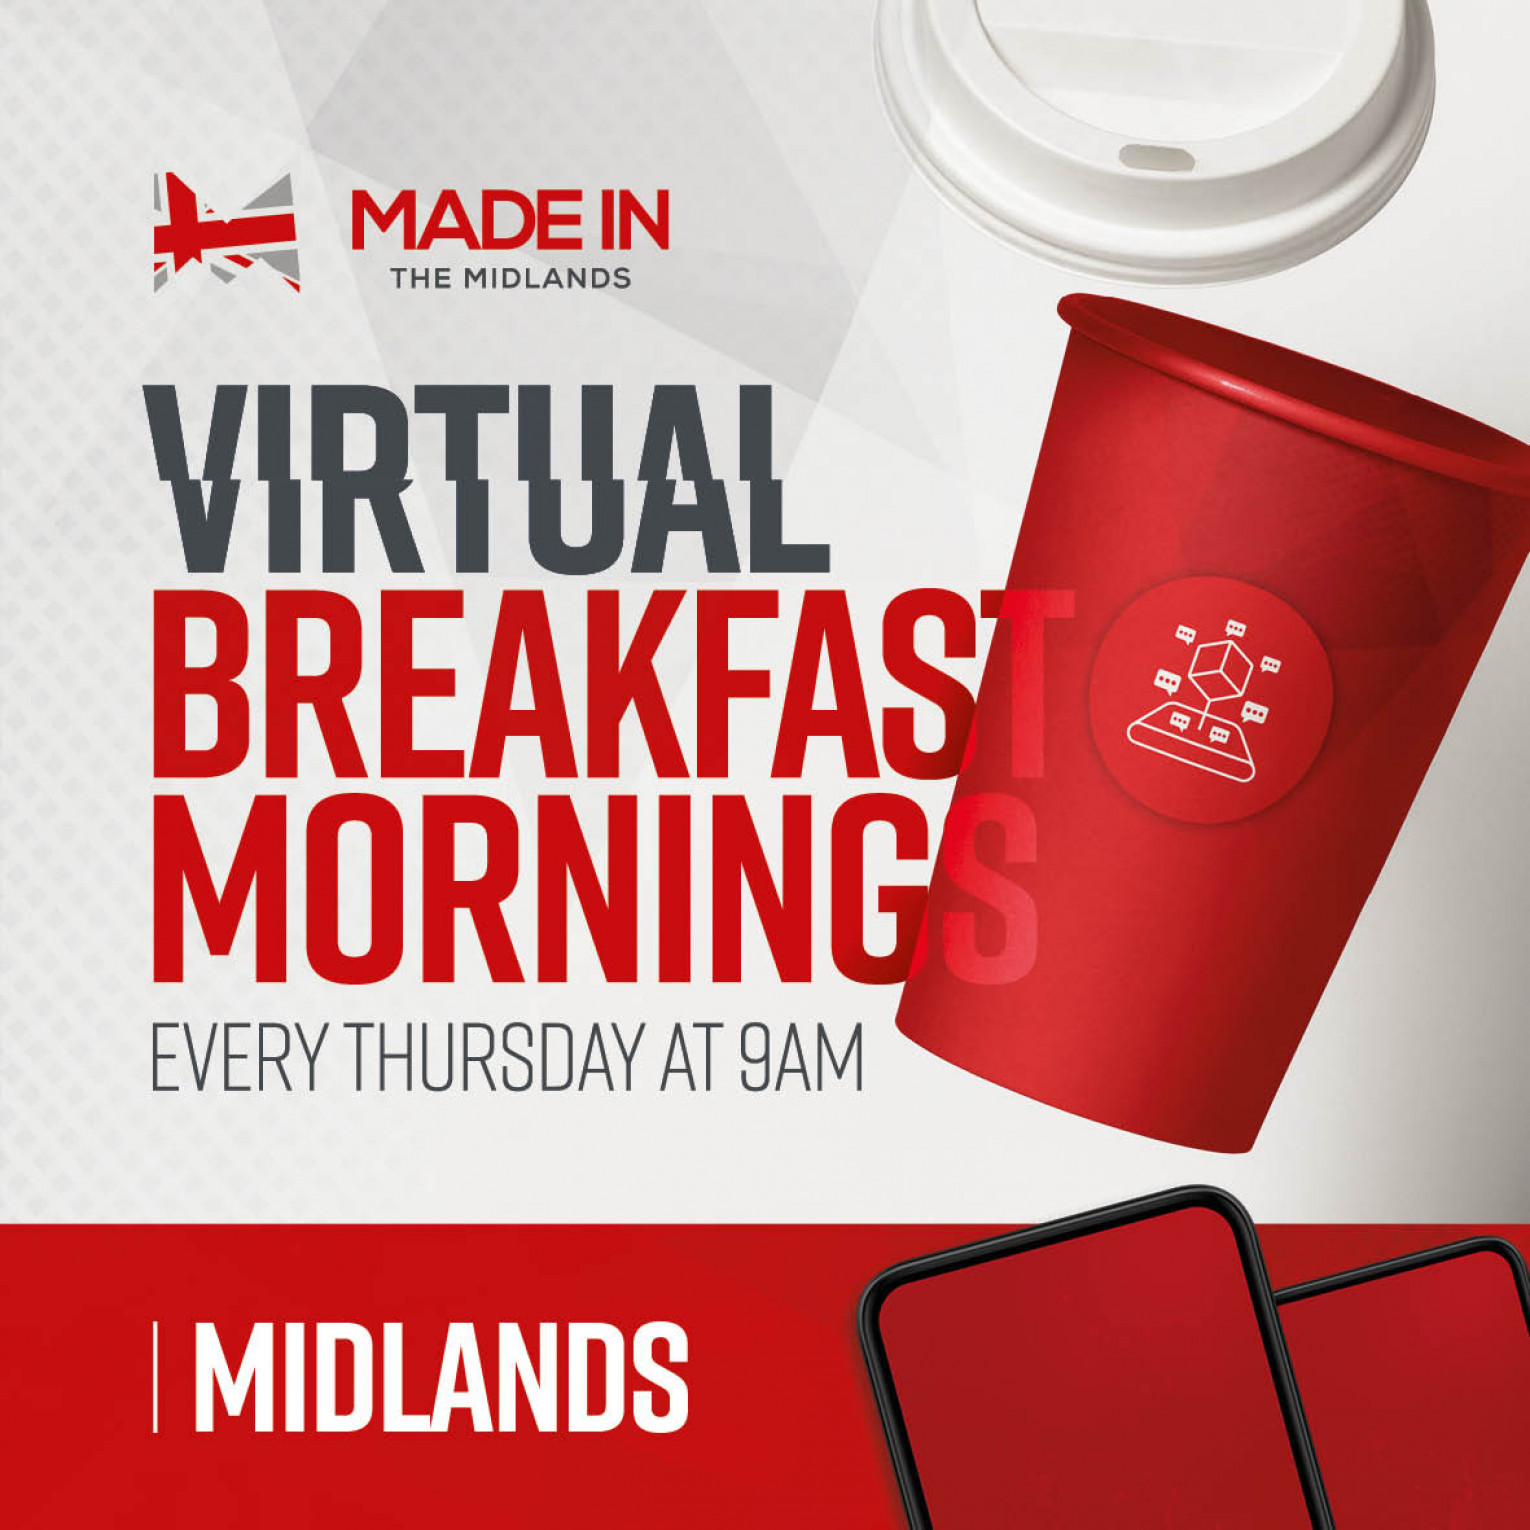 Made in the Midlands Virtual Breakfast Morning with Bevan Group